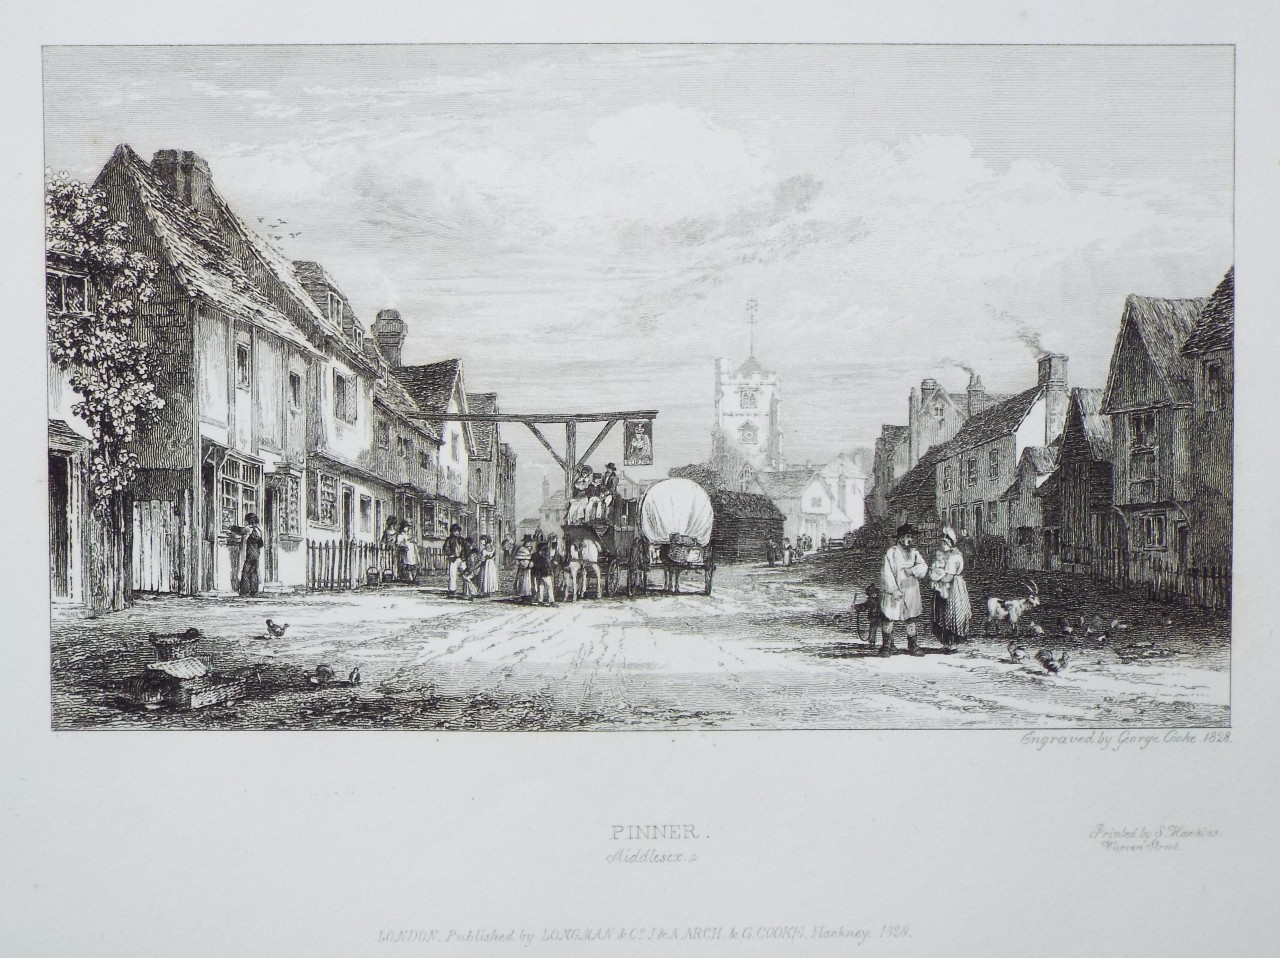 Print - Pinner, Middlesex. - Cooke